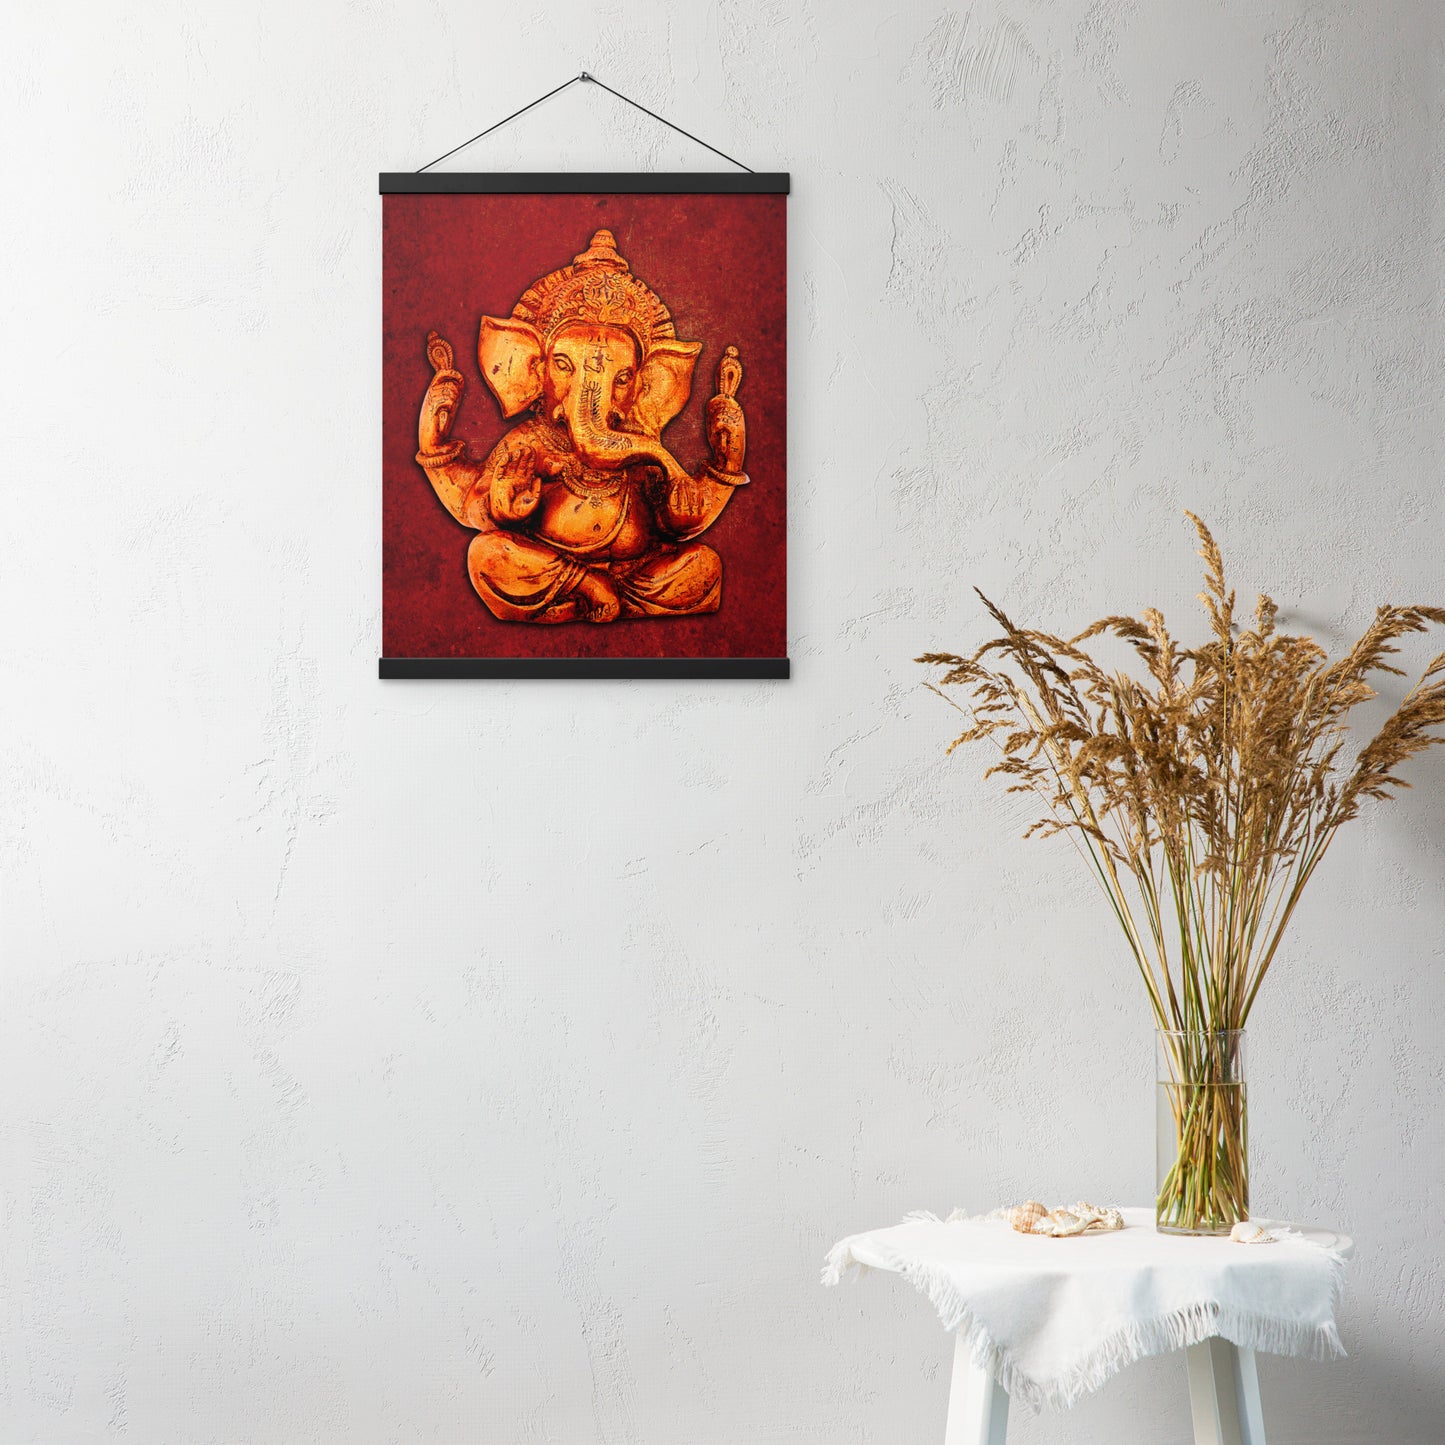 Wall Art Golden Ganesha on a Distressed Lava Red Background Printed on Archival Paper with Magnetic Wood Hangers 16x20 hung